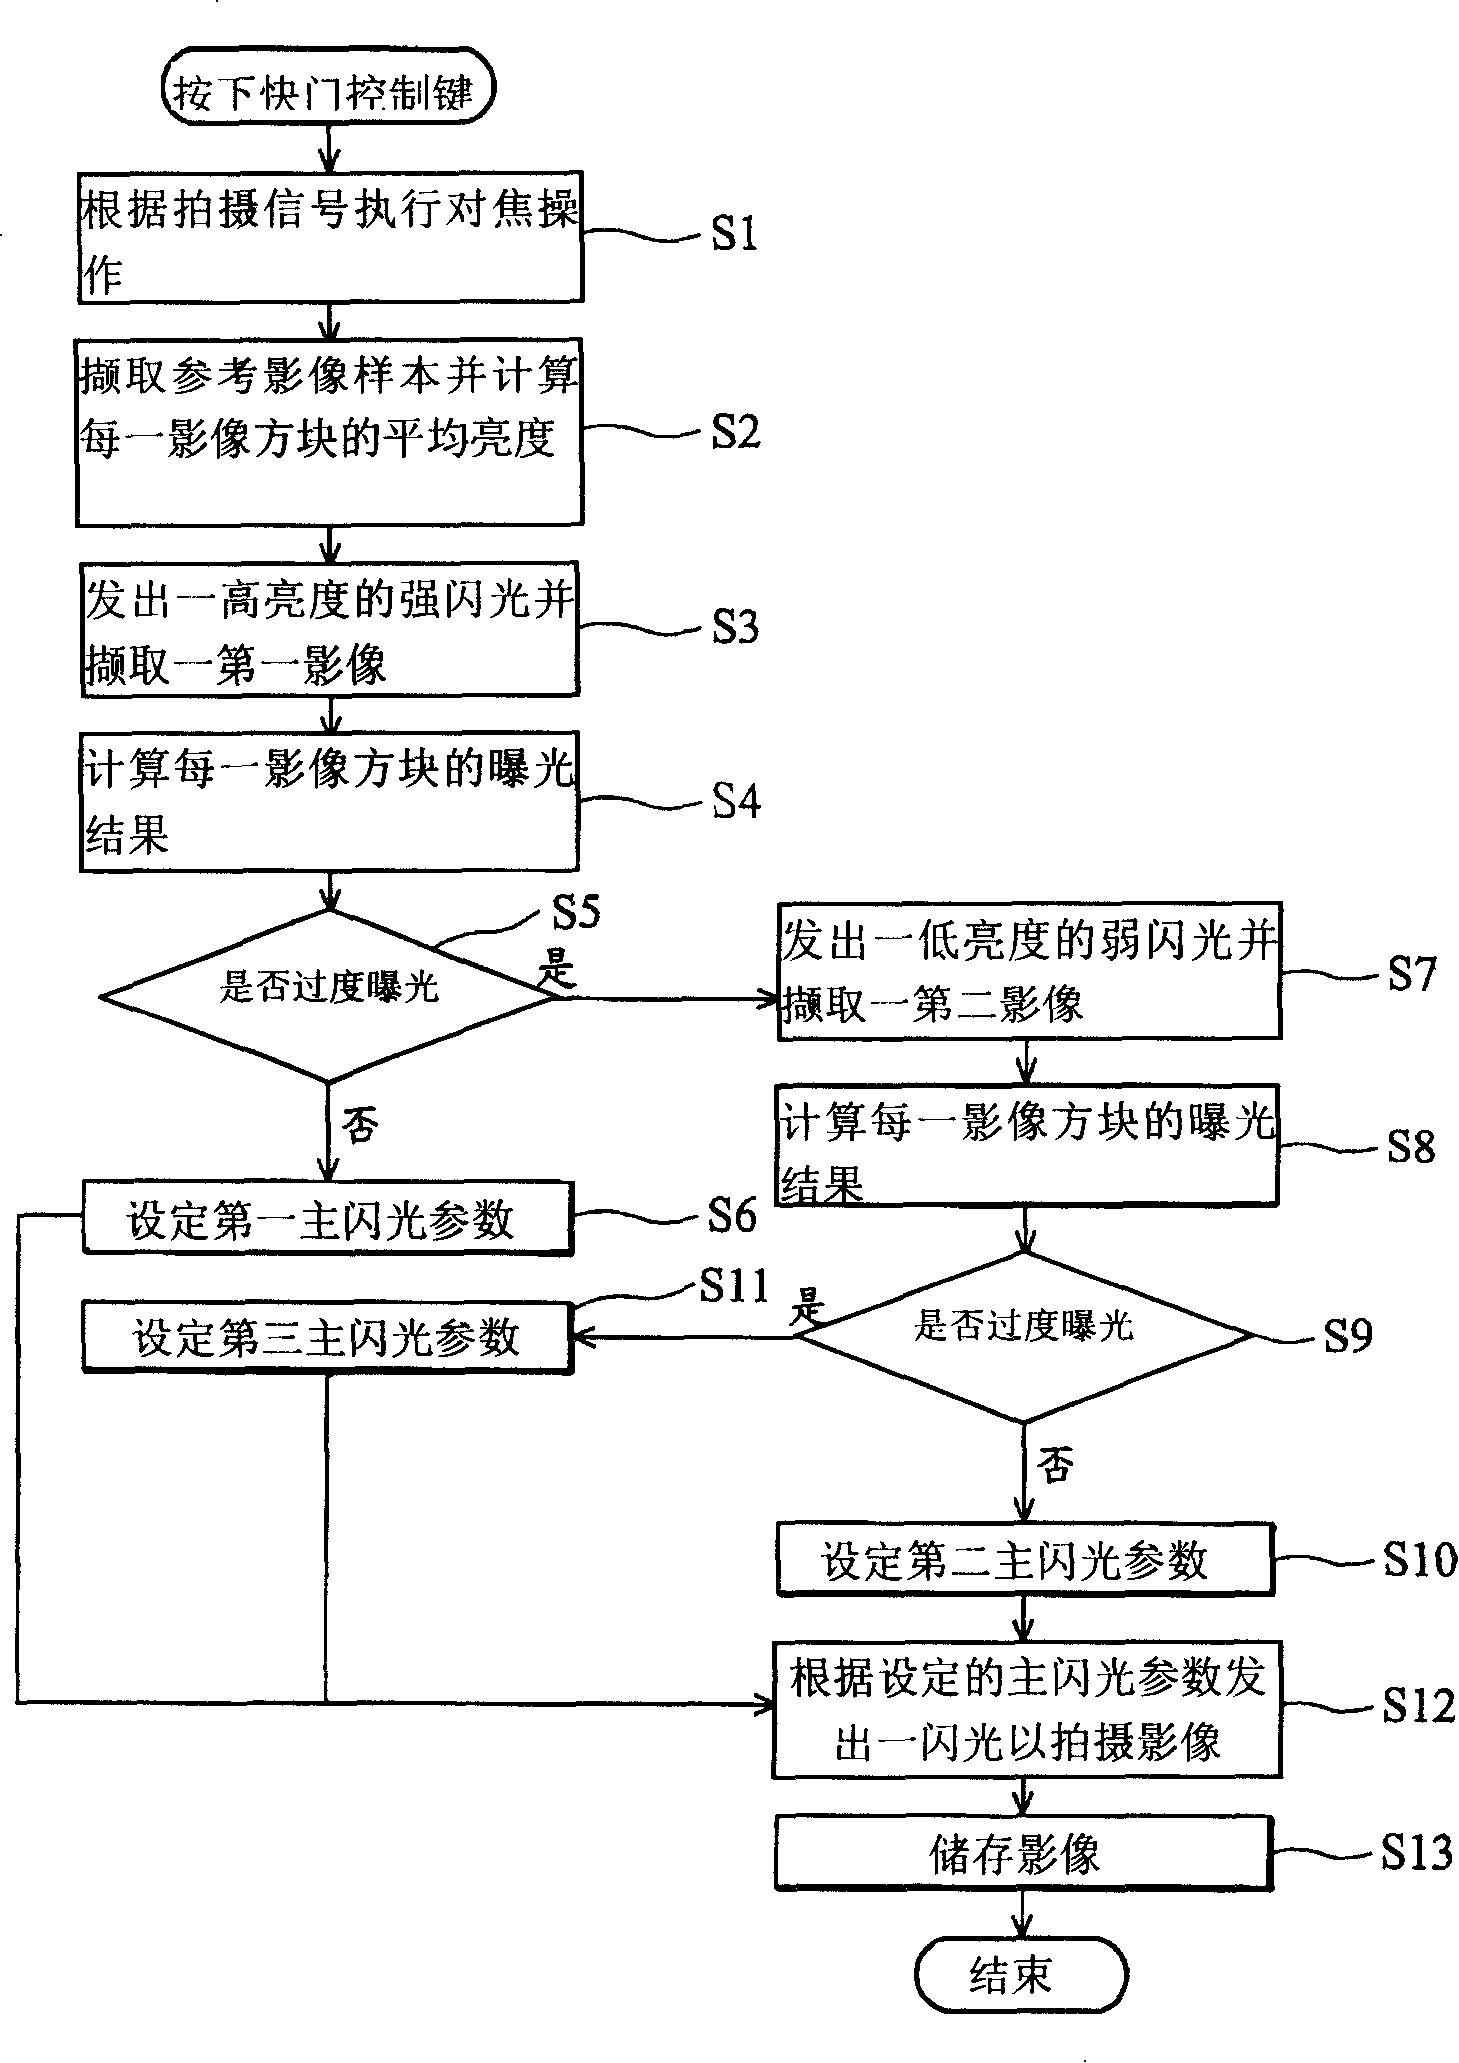 Image picking device and its flash control method